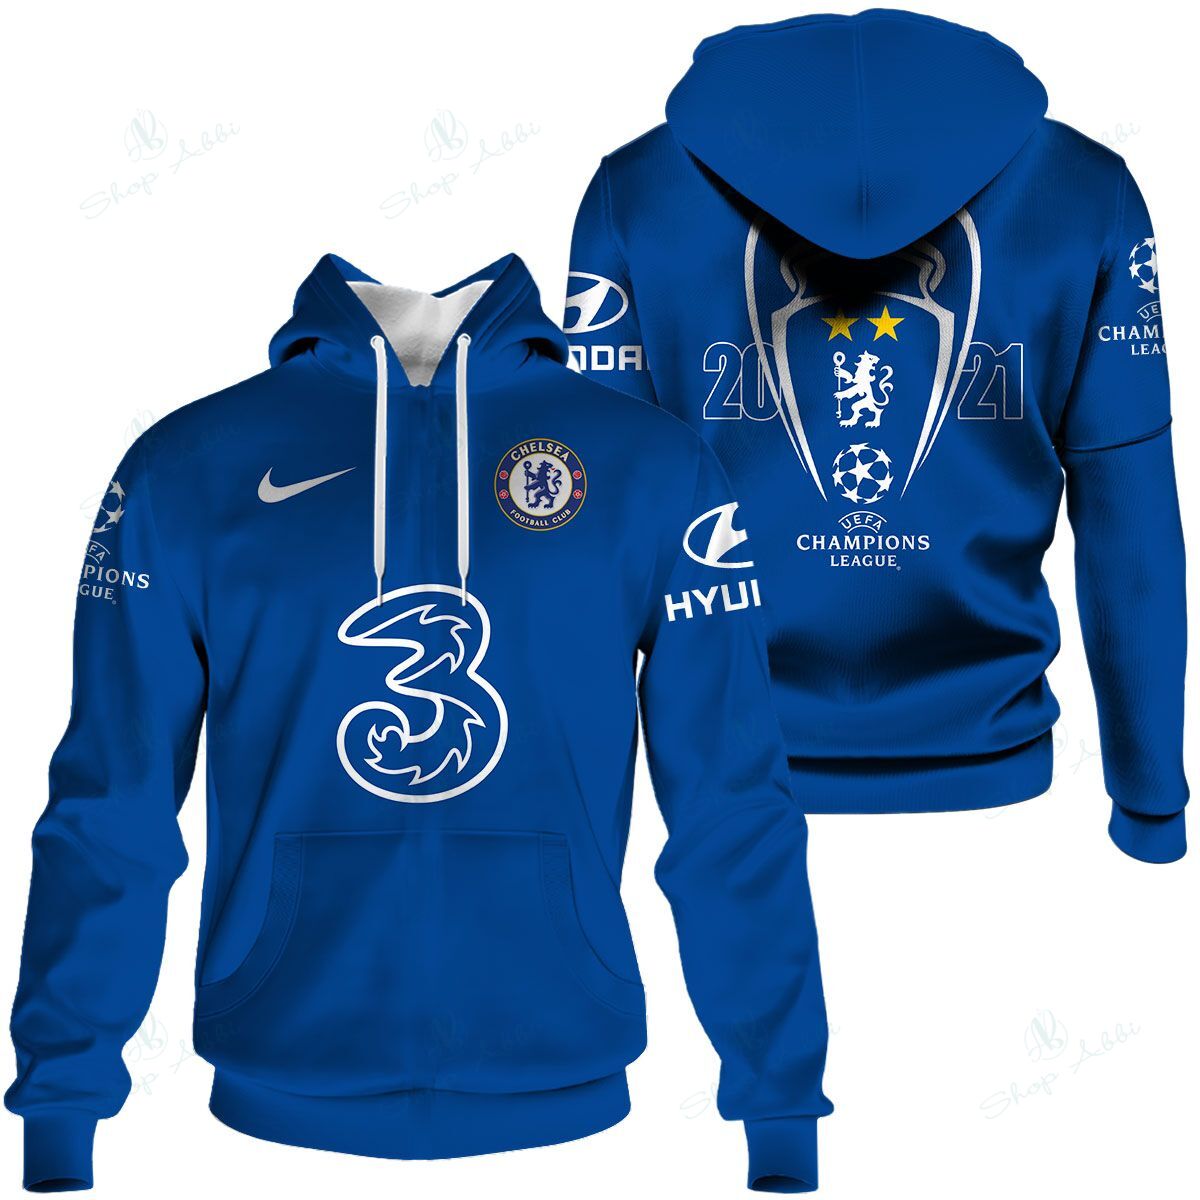 Chelsea champions 2021 3d hoodie and shirt 2